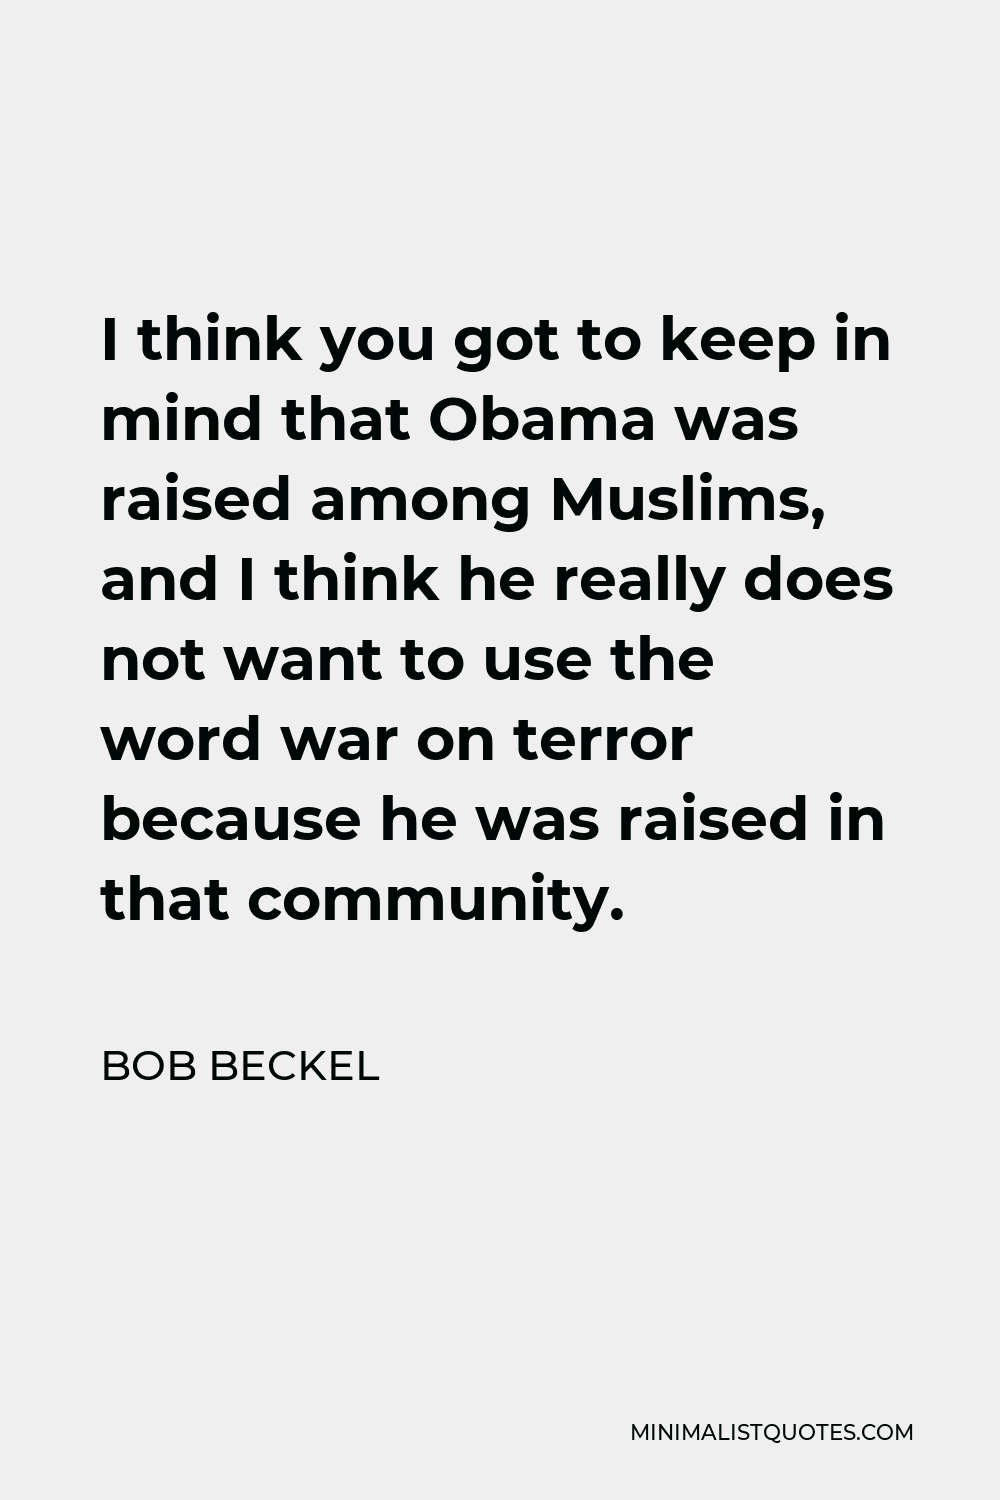 Bob Beckel Quote - I think you got to keep in mind that Obama was raised among Muslims, and I think he really does not want to use the word war on terror because he was raised in that community.